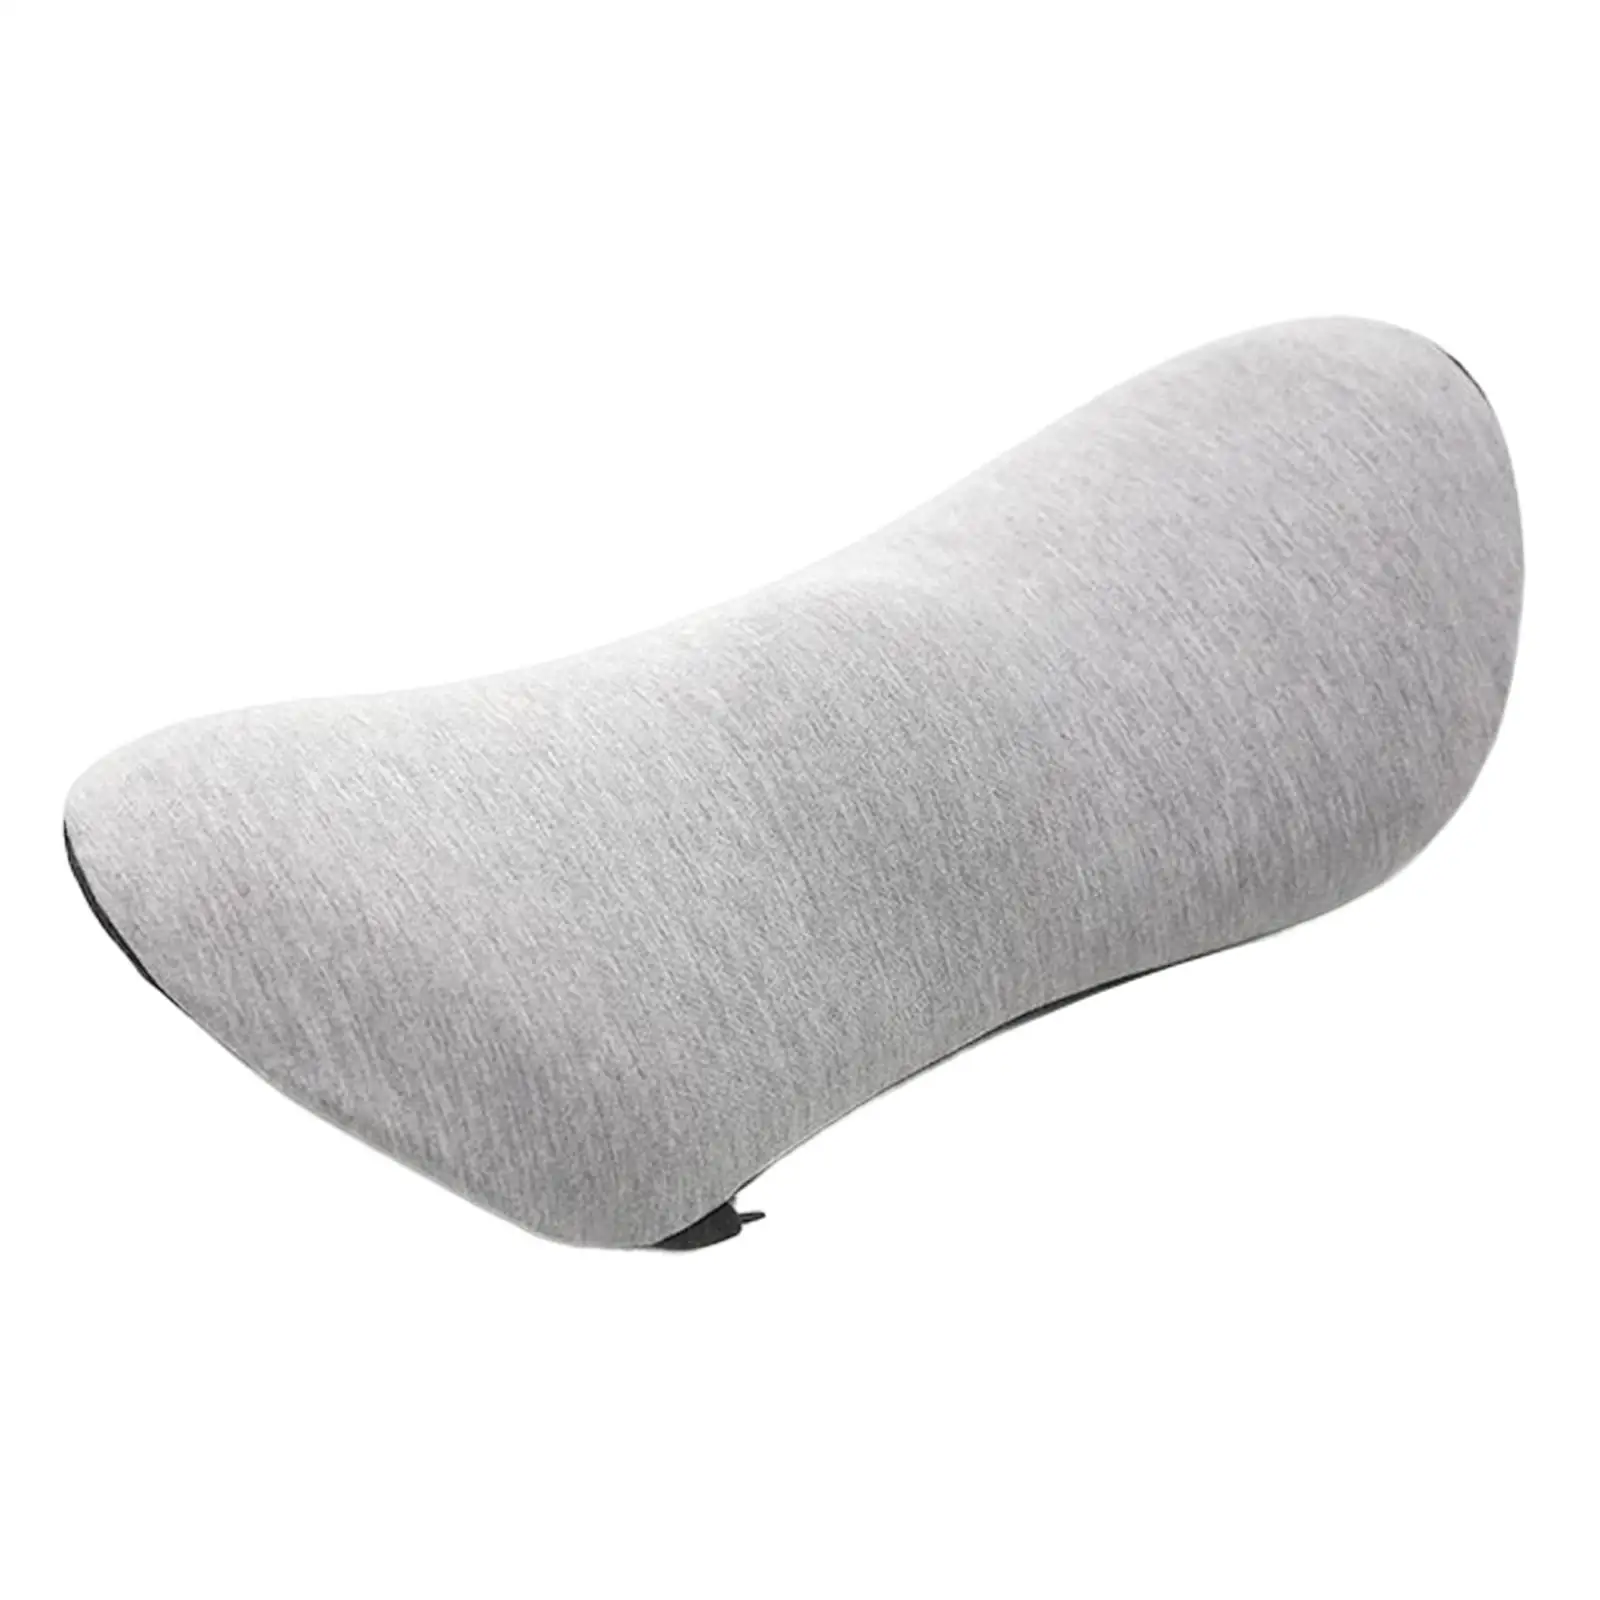 Soft Waist Cushion Lower Back Pillow Memory Foam Cushion Durable Comfortable Premium Material for Home Office Breathable